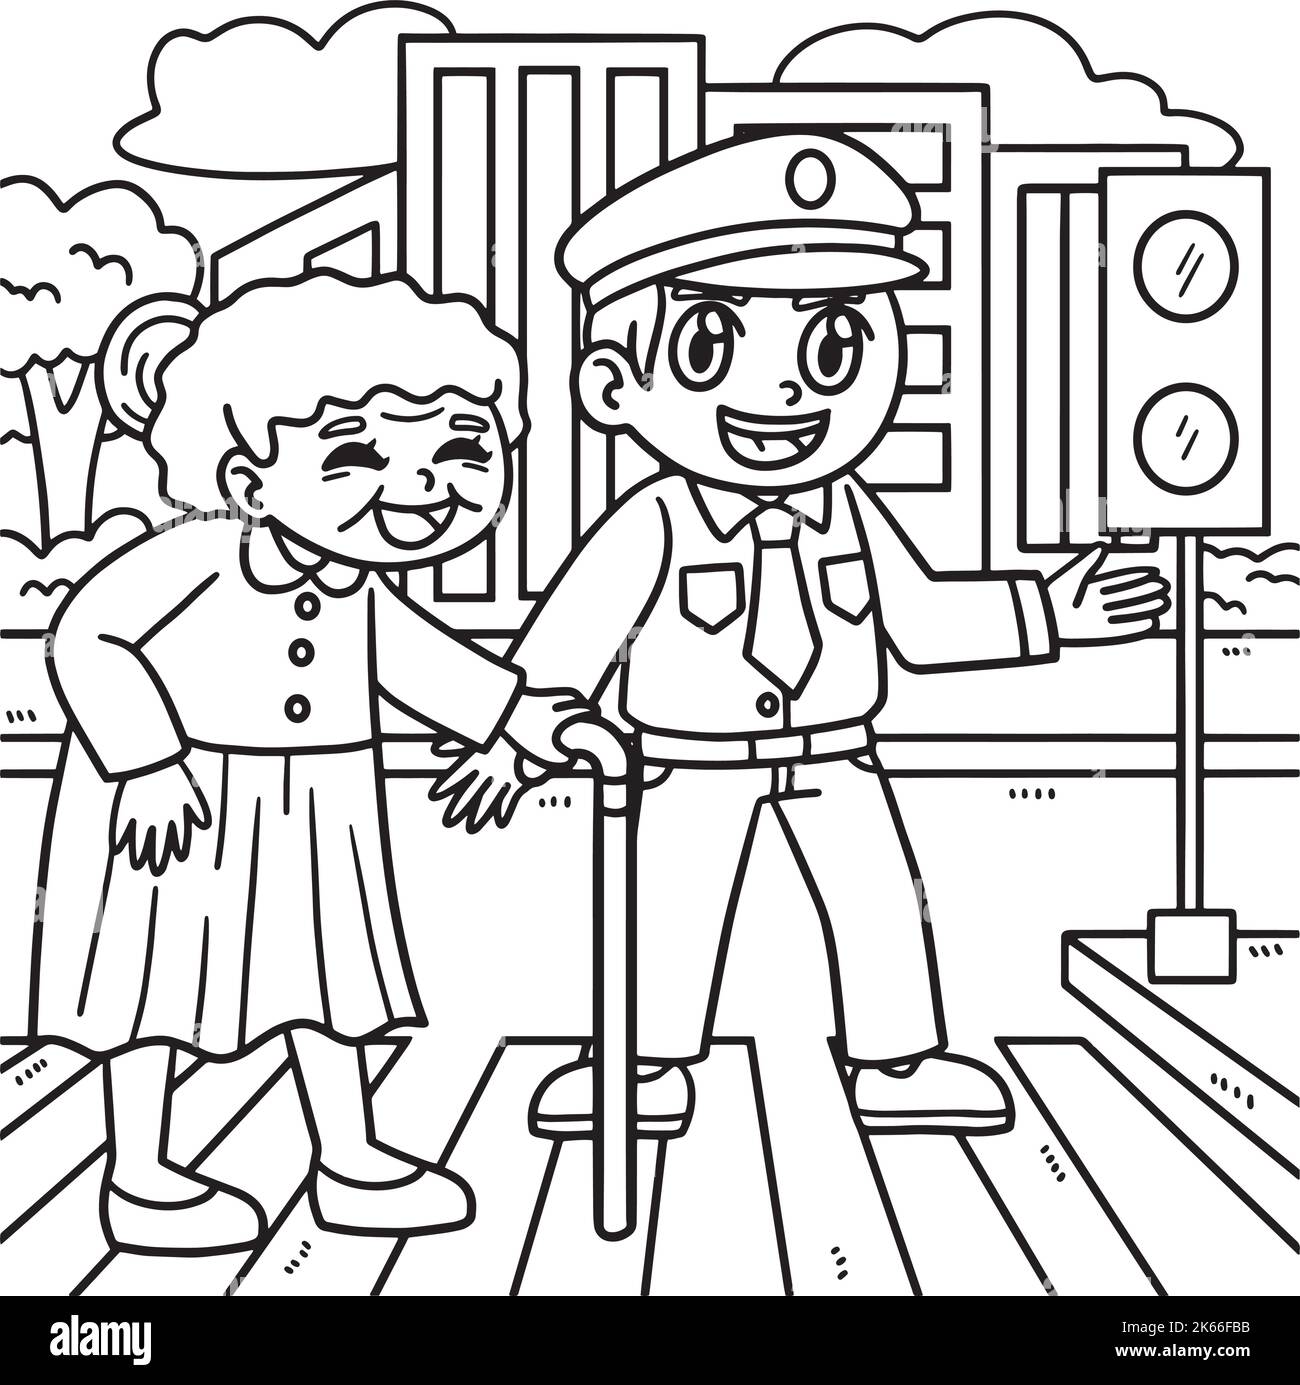 Police Helping Old Woman Coloring Page for Kids Stock Vector